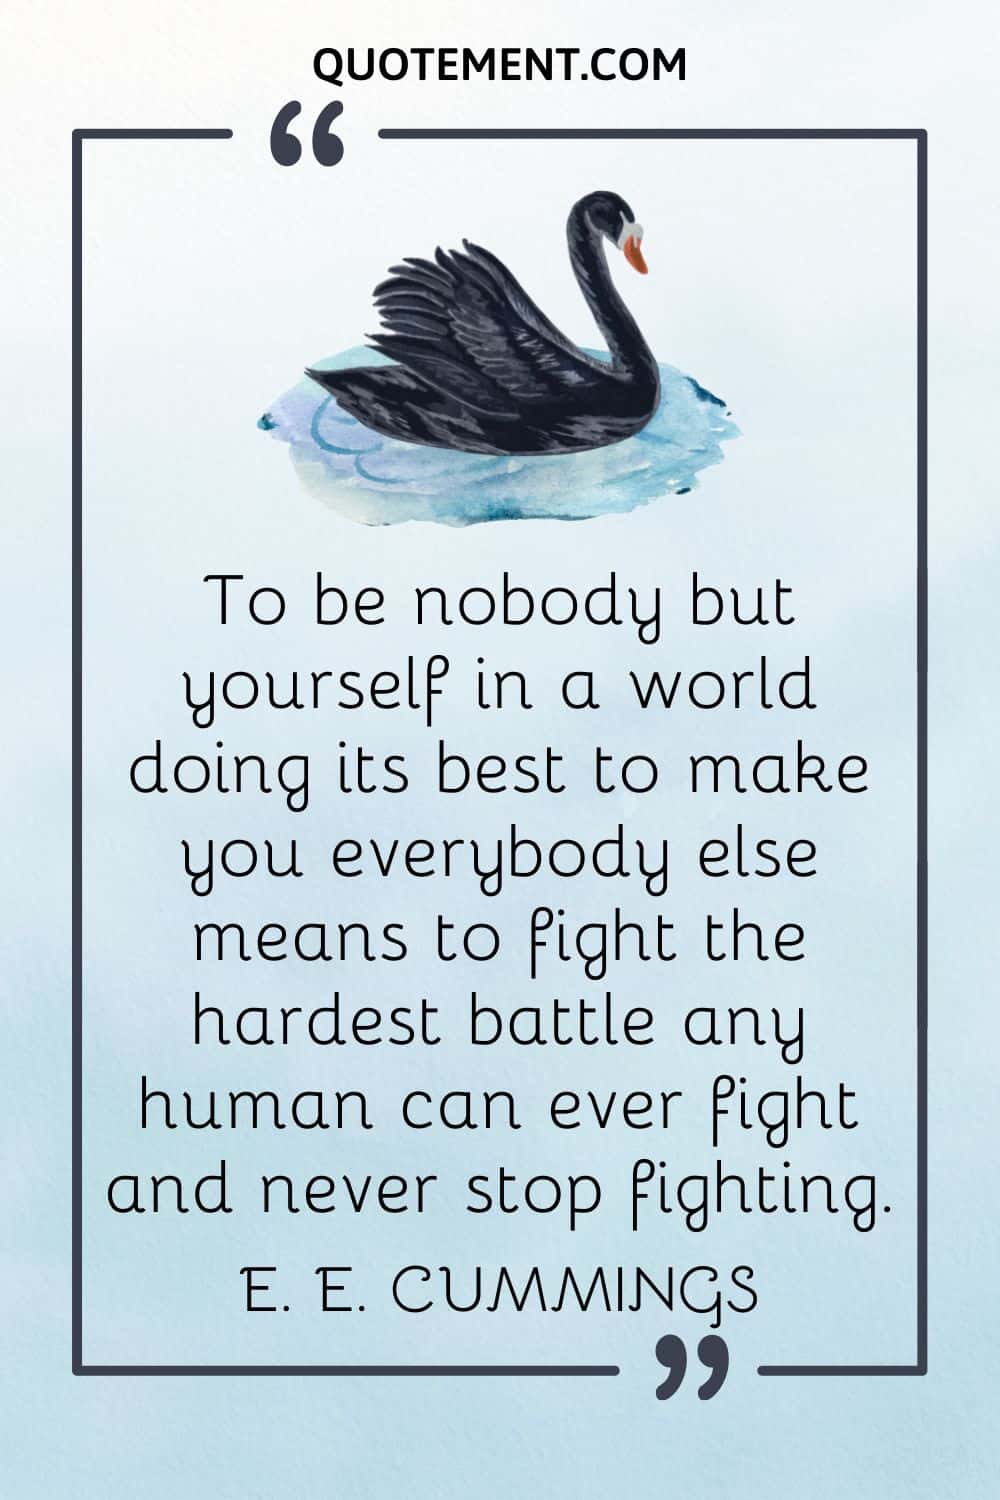 To be nobody but yourself in a world doing its best to make you everybody else means to fight the hardest battle any human can ever fight and never stop fighting